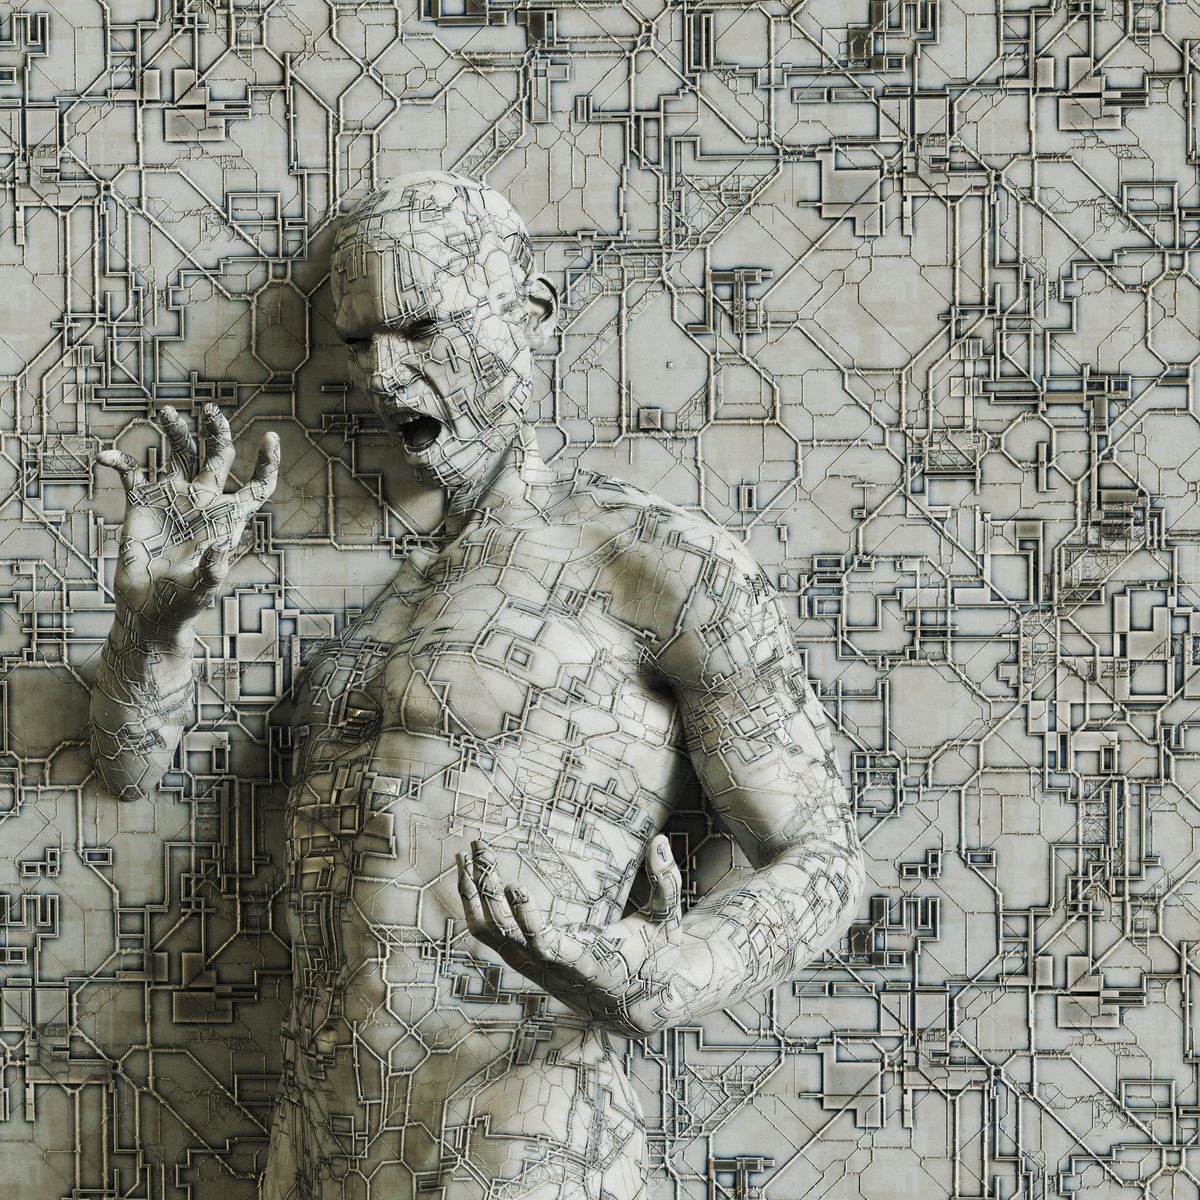 human figures covered in circuits struggling to free himself